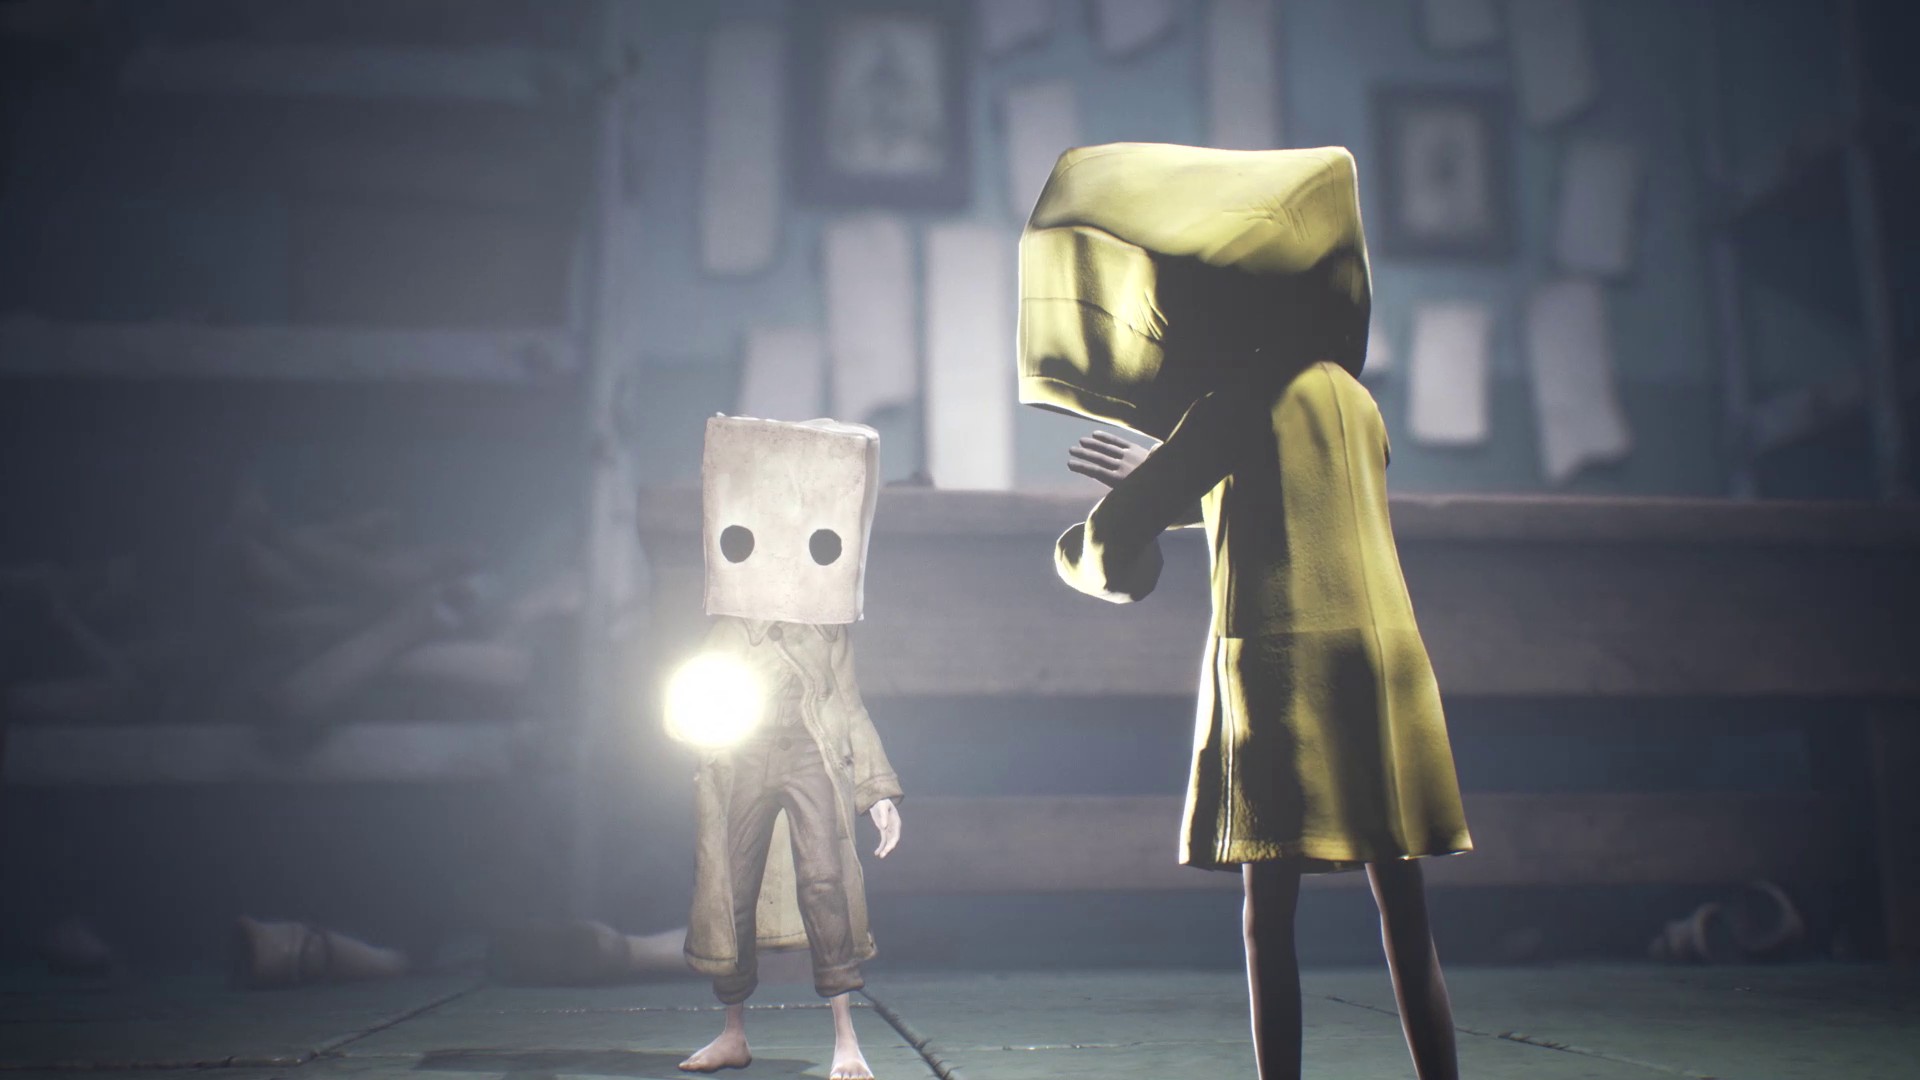 Video For Wake Up, Mono: It’s Time to Play the Little Nightmares II Demo